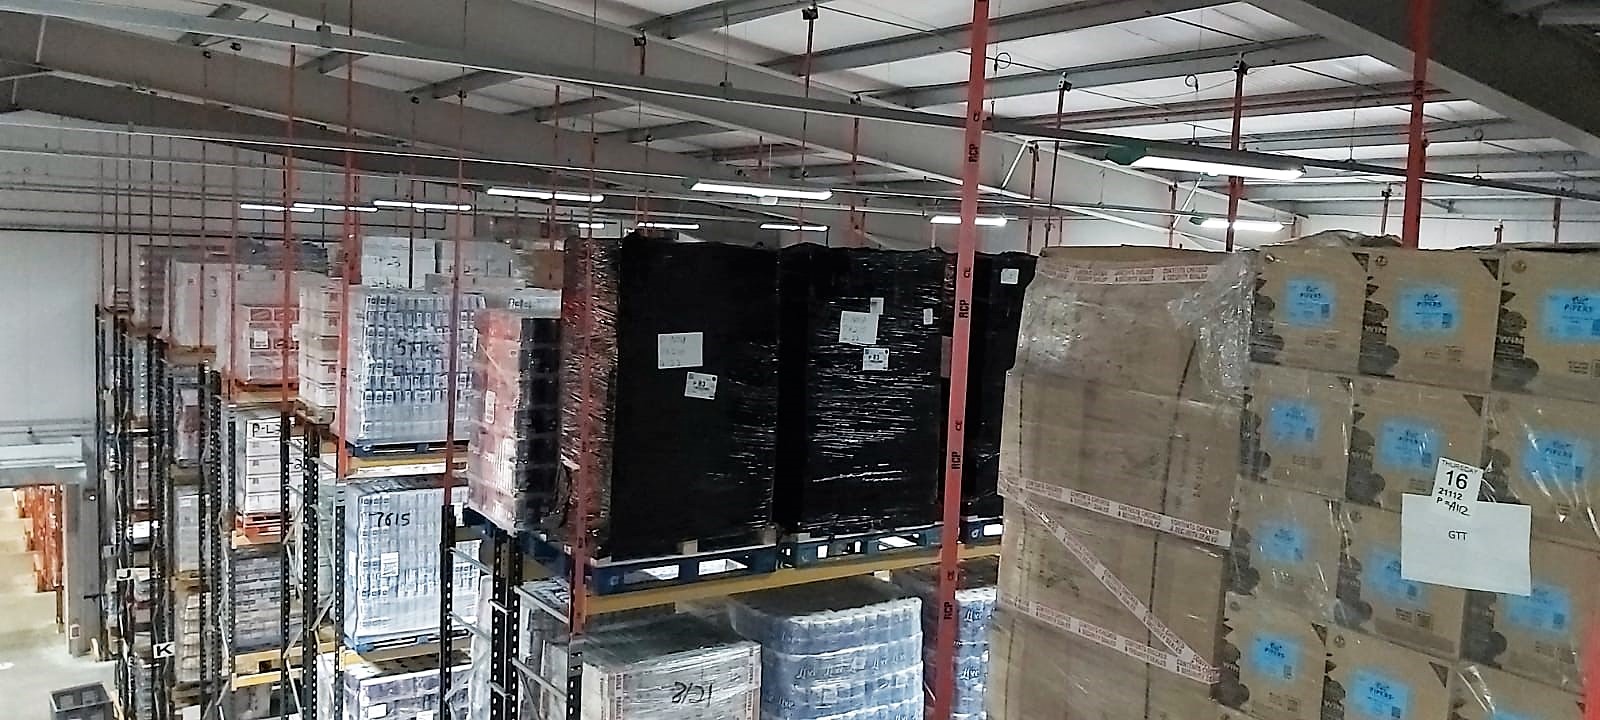 Welsh Food Distributor Installs Rack Collapse Prevention’s Warehouse Safety Racking System